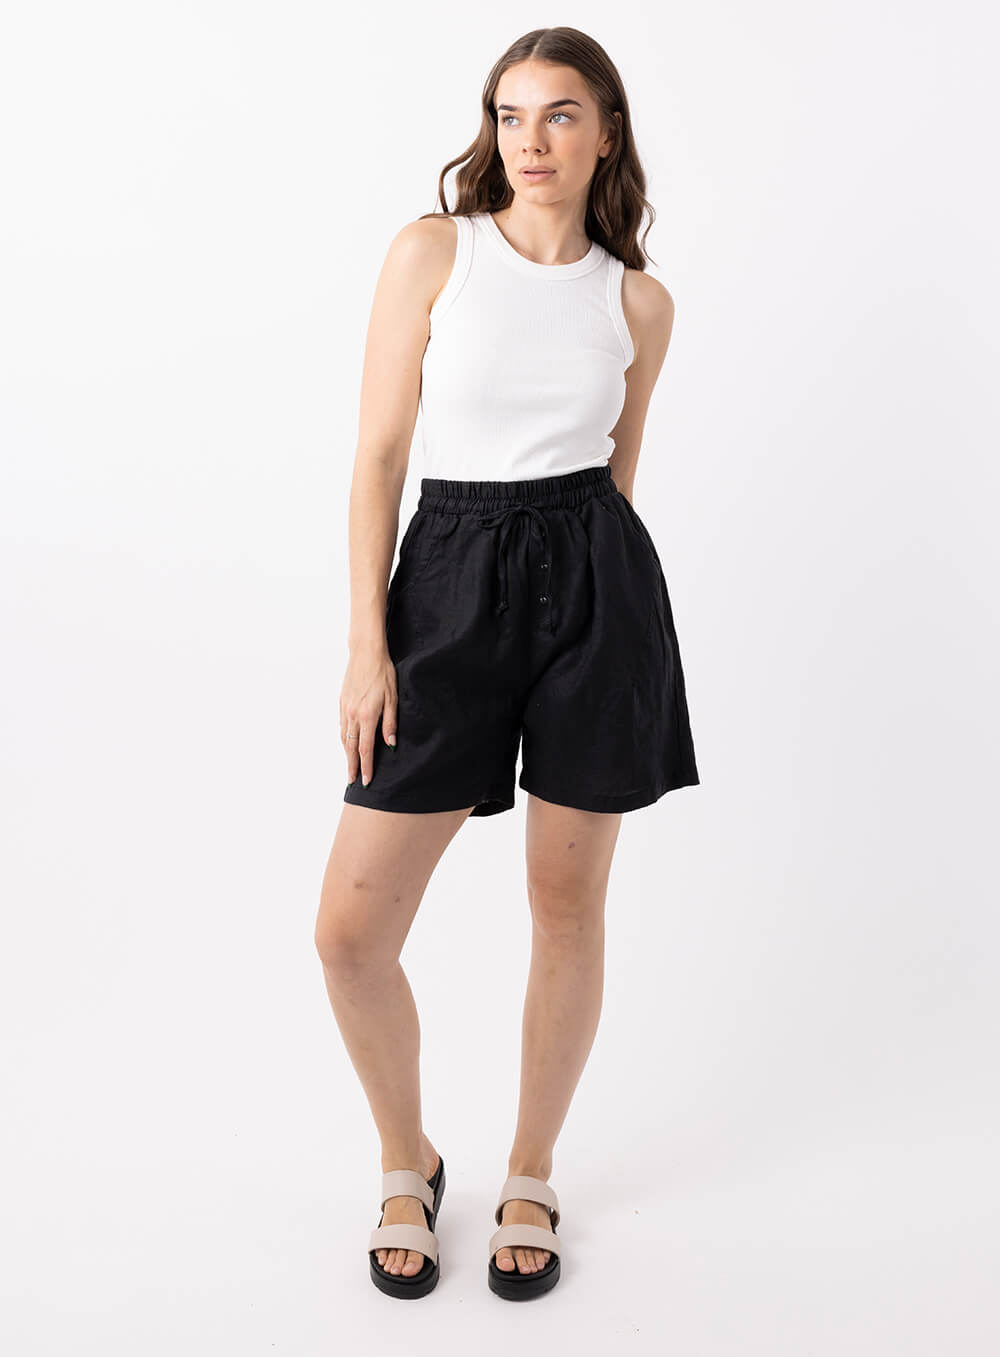 Adeline linen short in black has 20mm elestic wiast band with tie. It has 2 side pockets, is mid thigh length with 100% breathabe linen fabric.. 